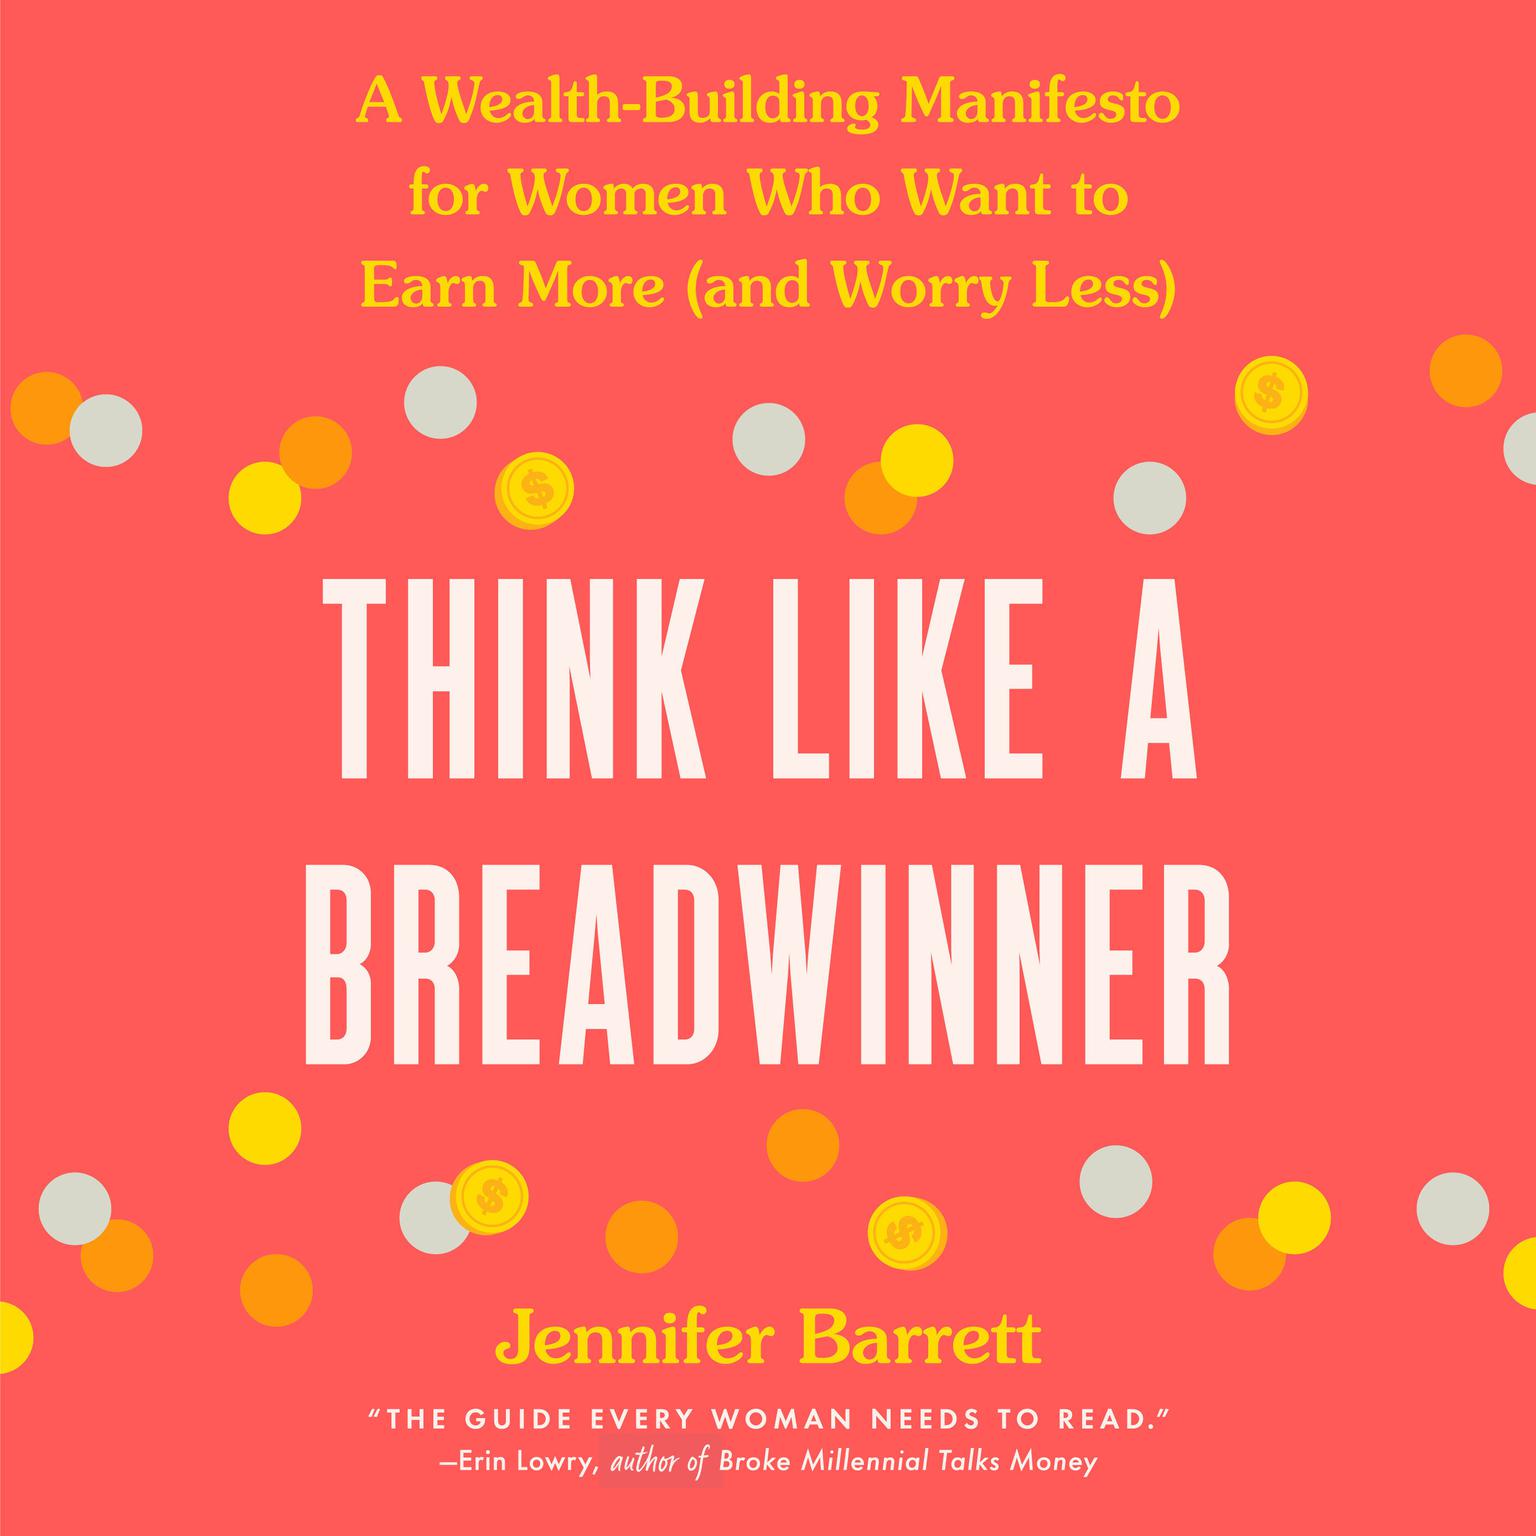 Think Like a Breadwinner: A Wealth-Building Manifesto for Women Who Want to Earn More (and Worry Less) Audiobook, by Jennifer Barrett